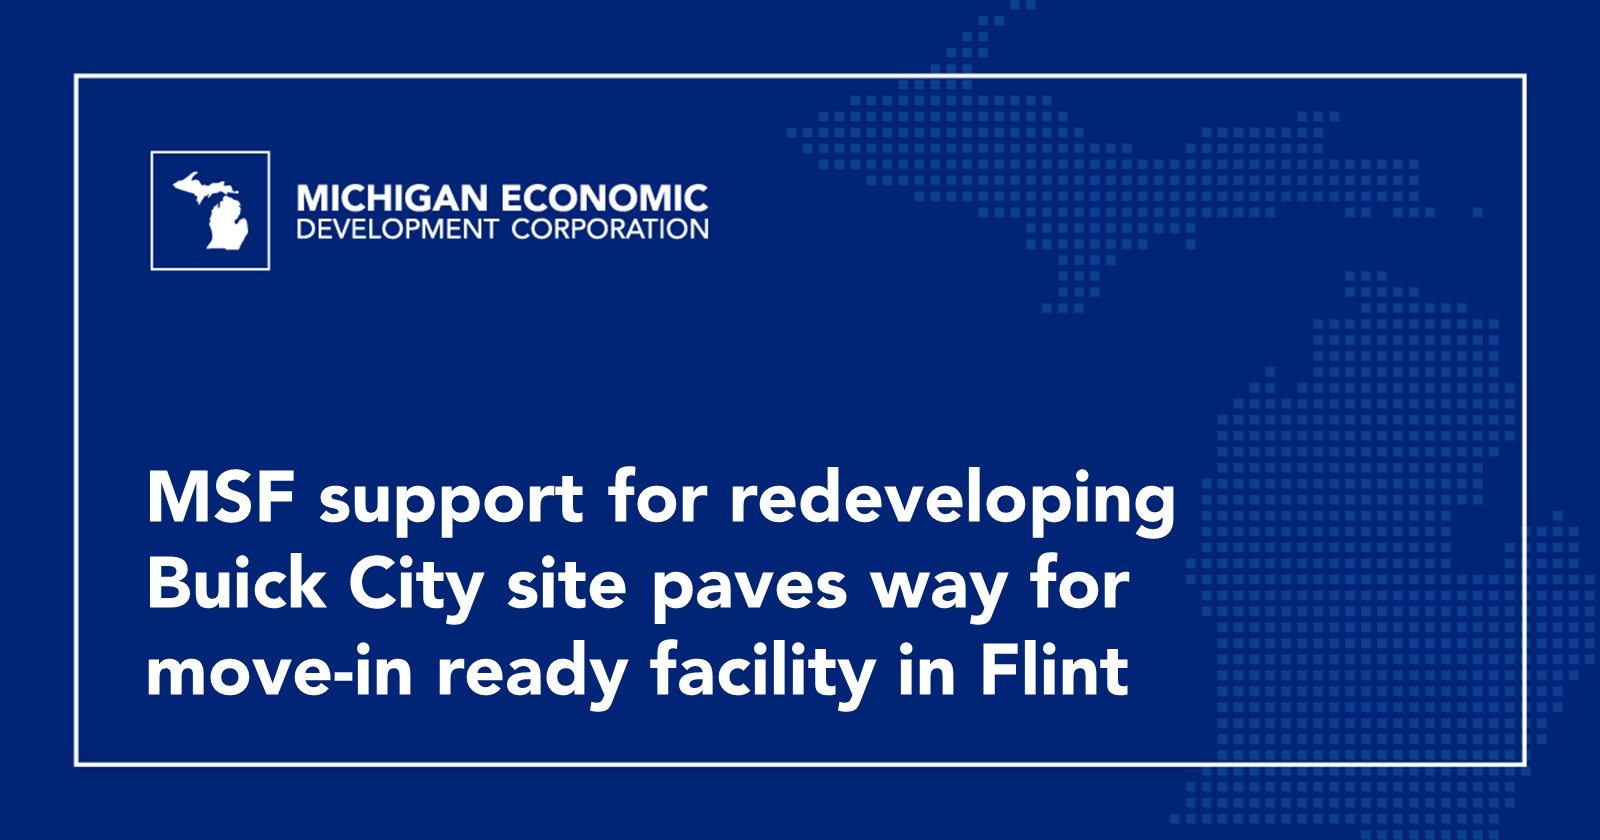 Flint CCED Update - Center for Community and Economic Development